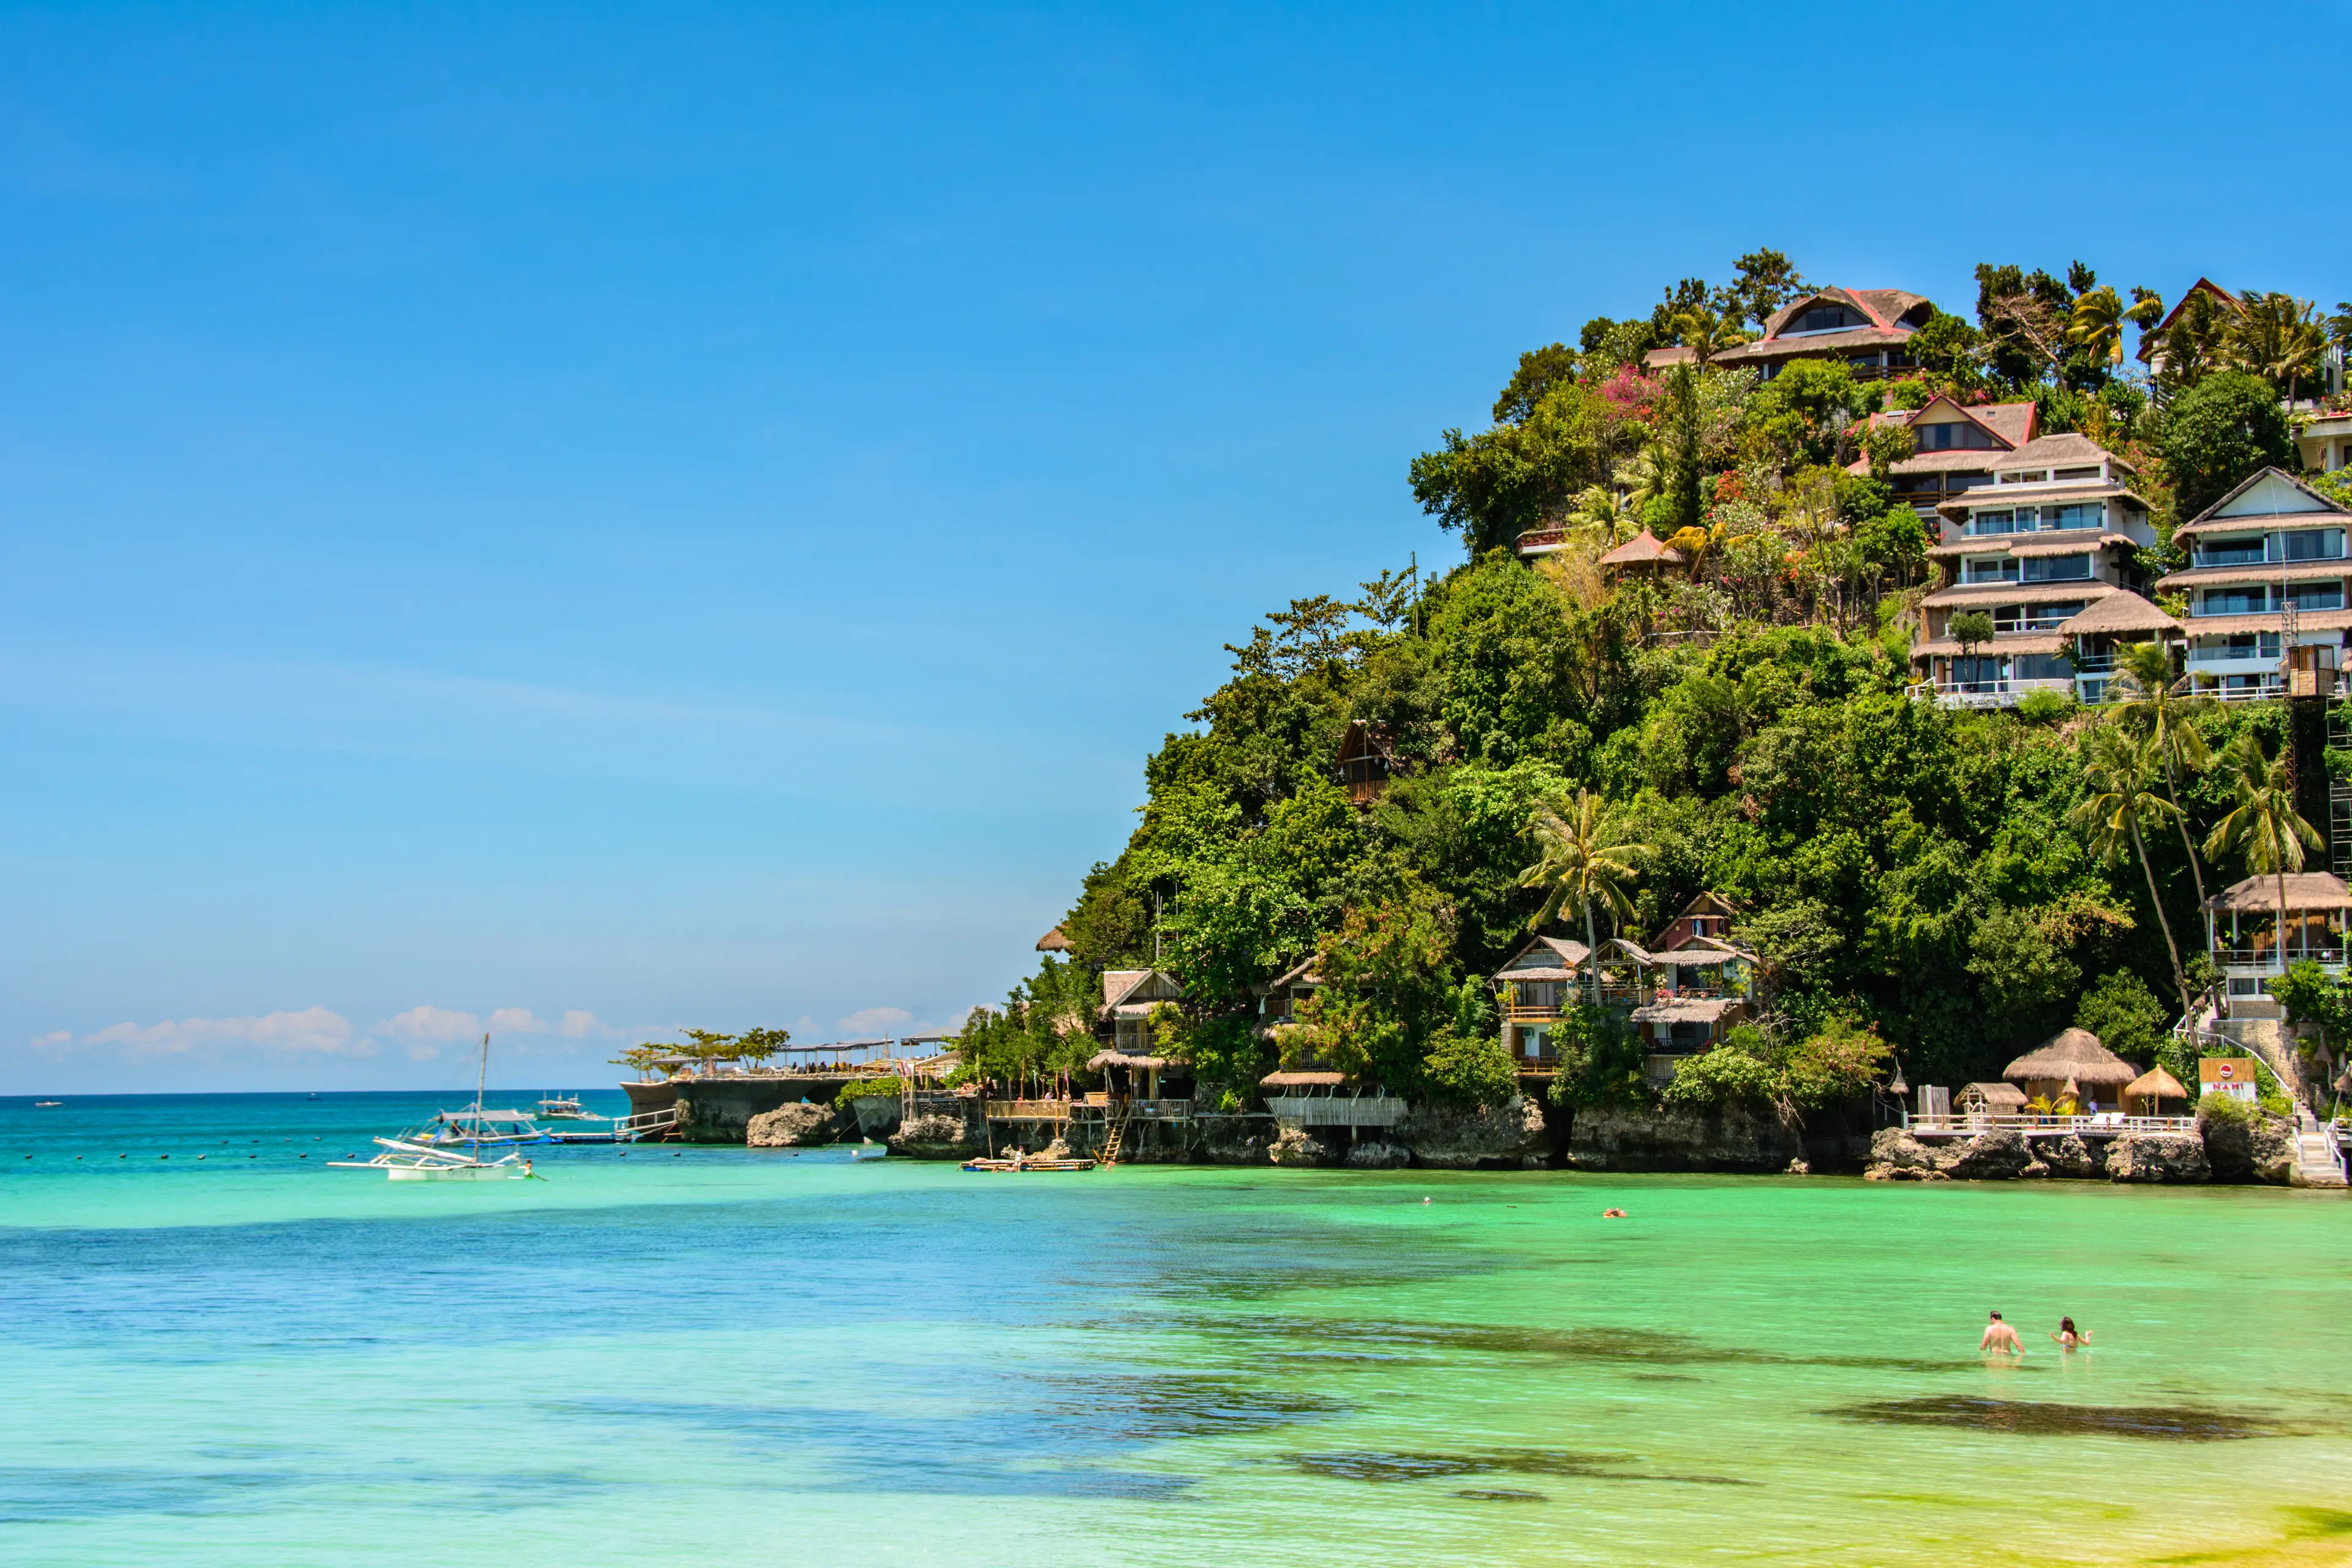 4-Day Epicurean and Shopping Adventure in Boracay, Philippines